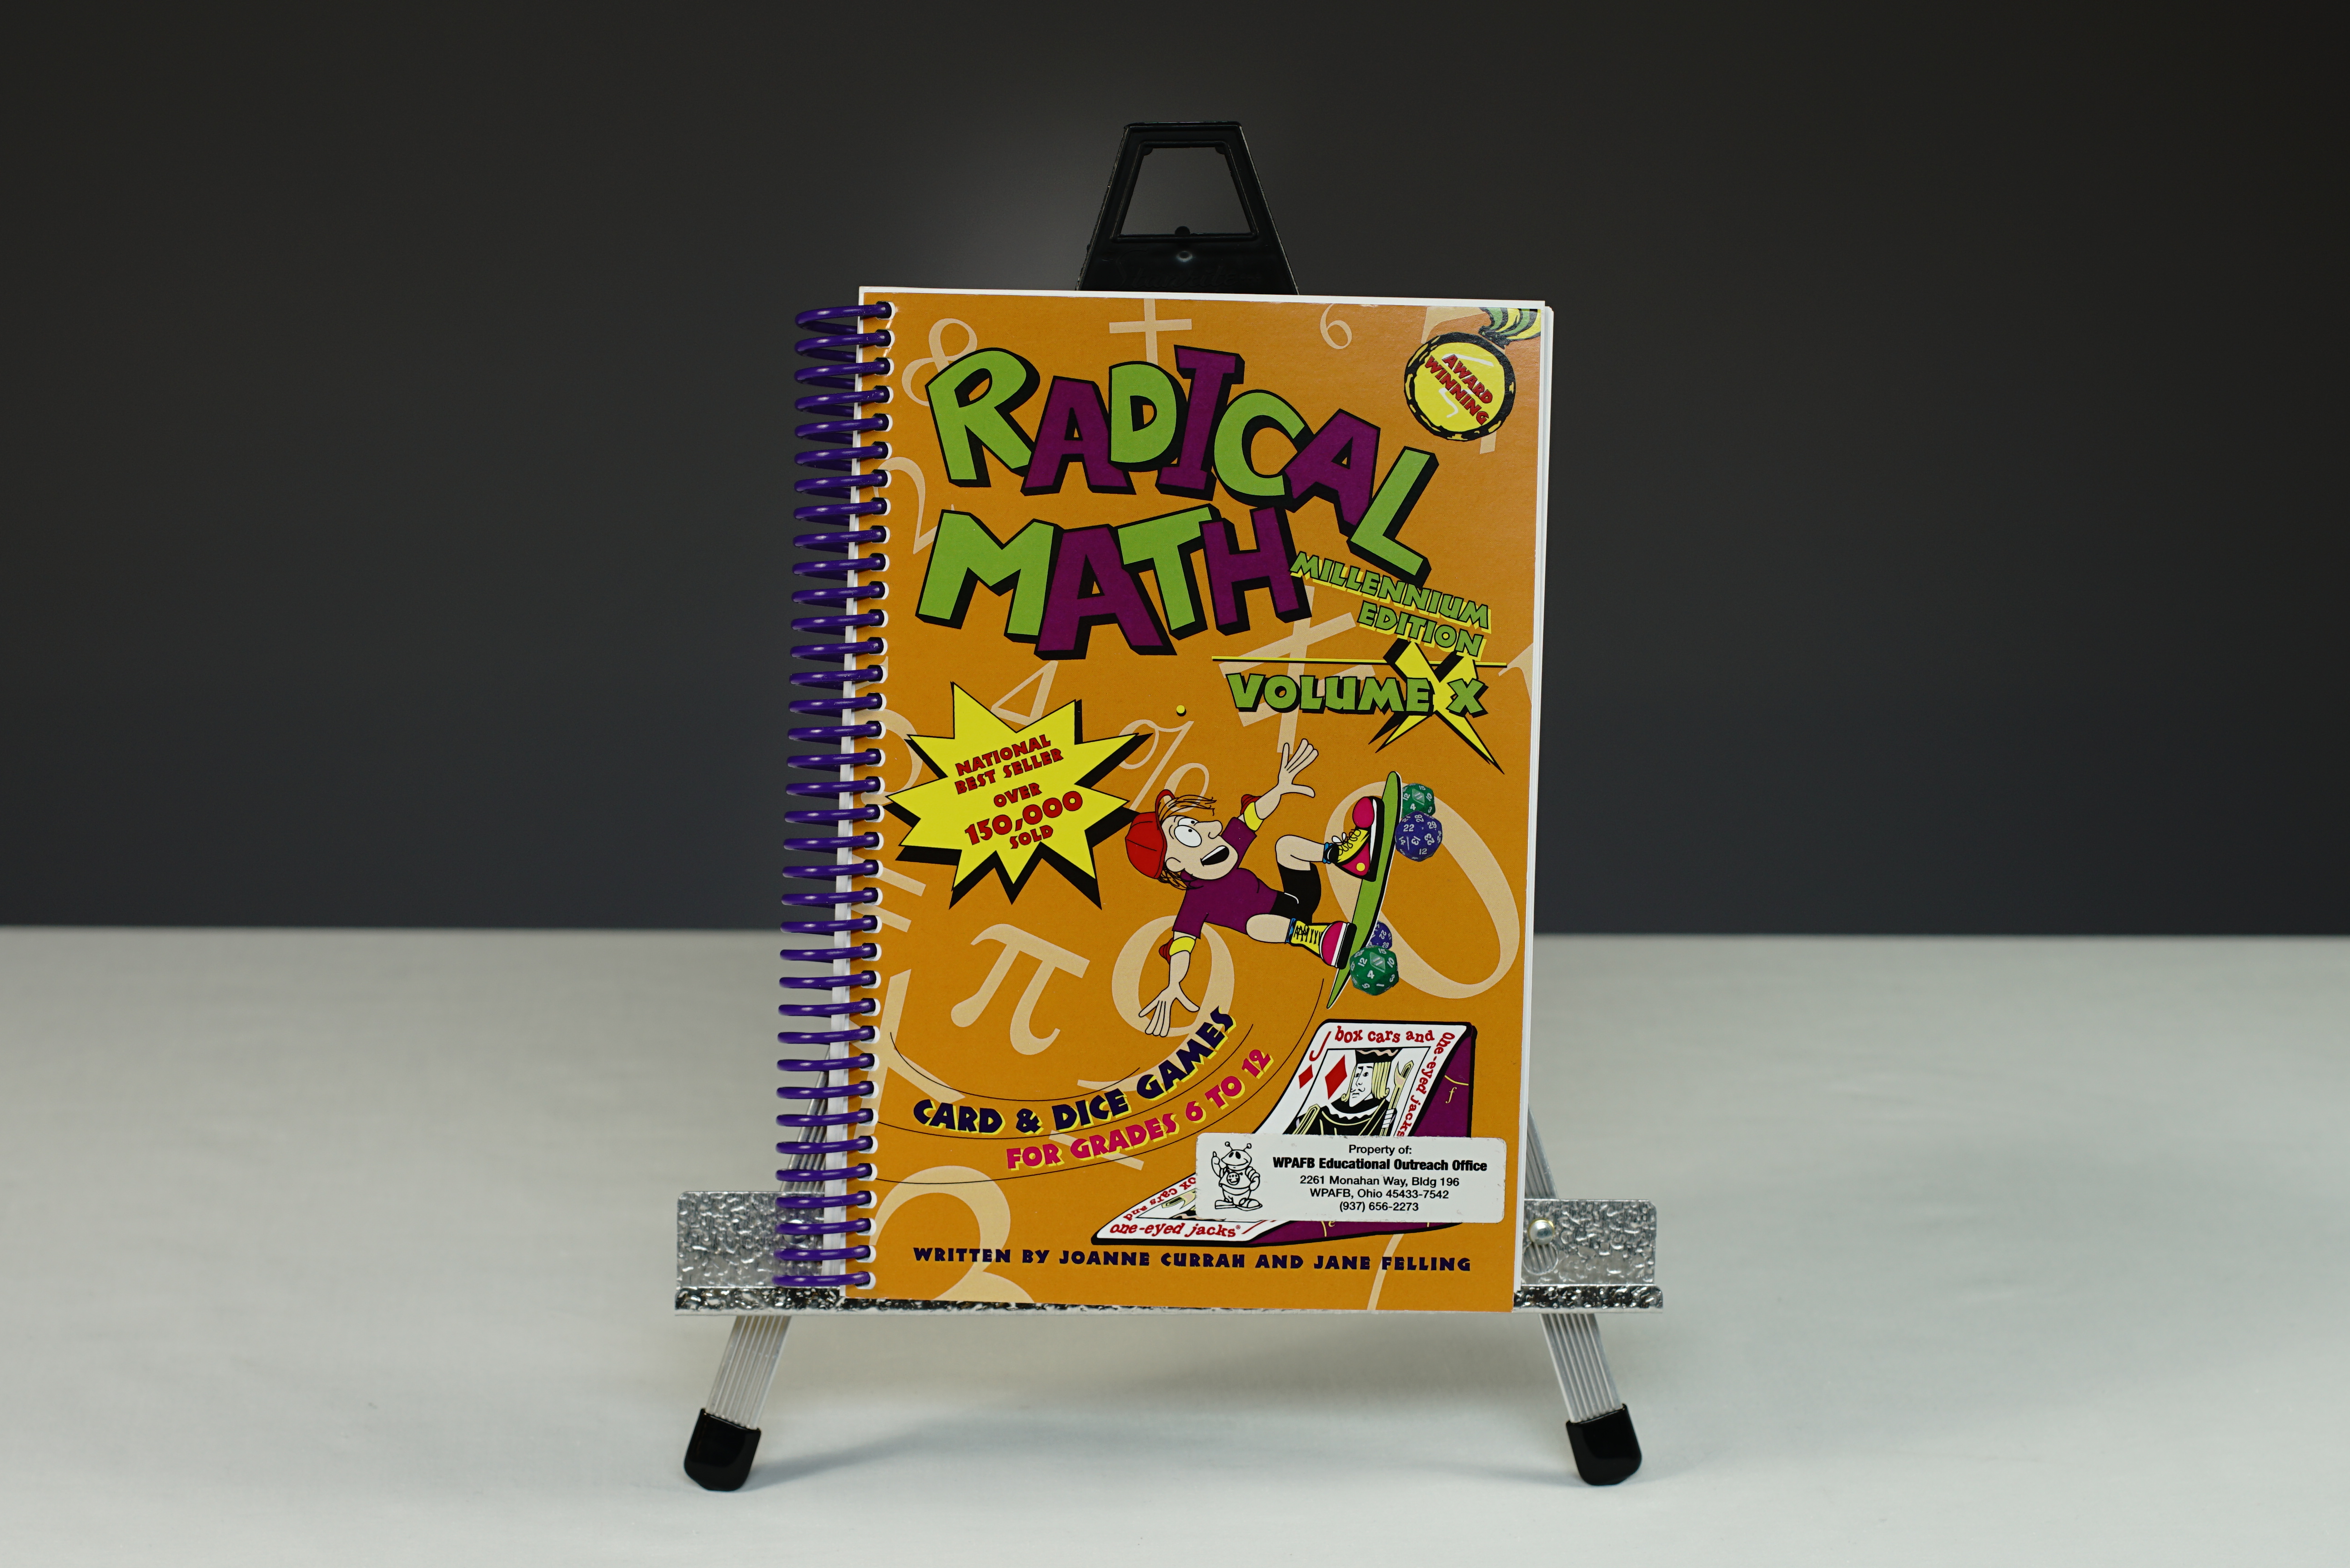 Radical Math - Card and Dice Games (6th-12th graders) Book